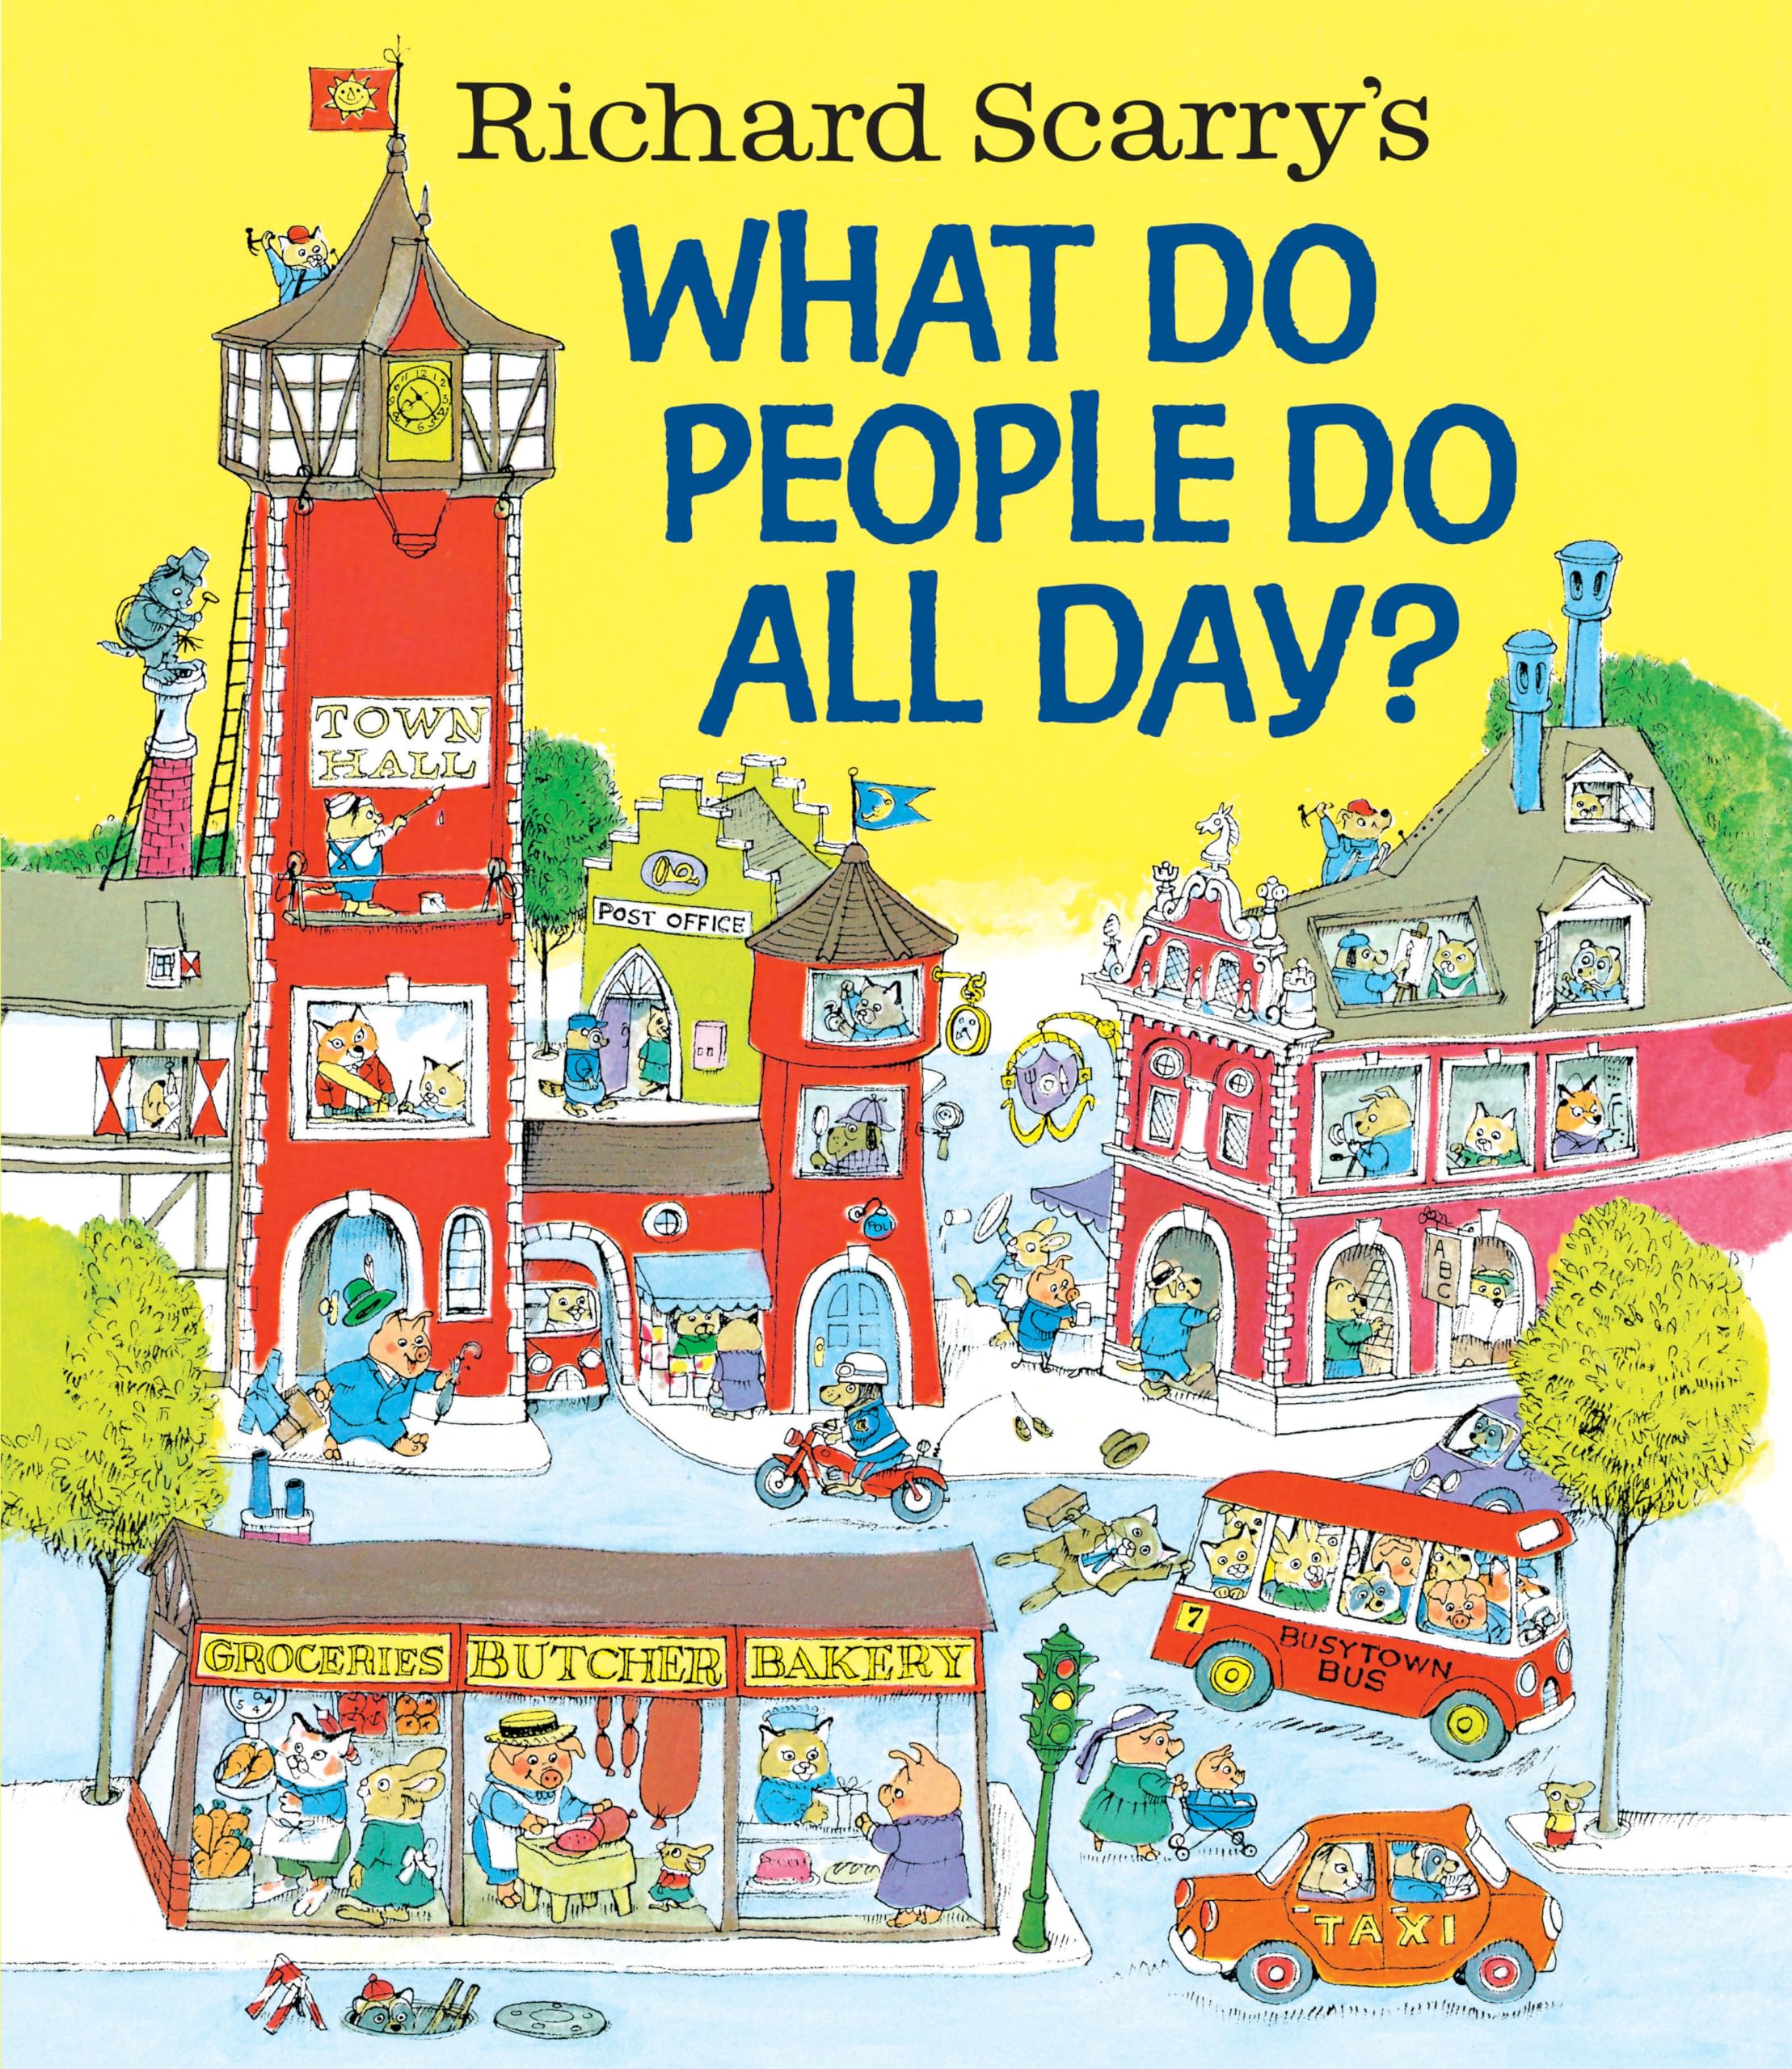 Richard Scarry's What Do People Do All Day? by Scarry, Richard